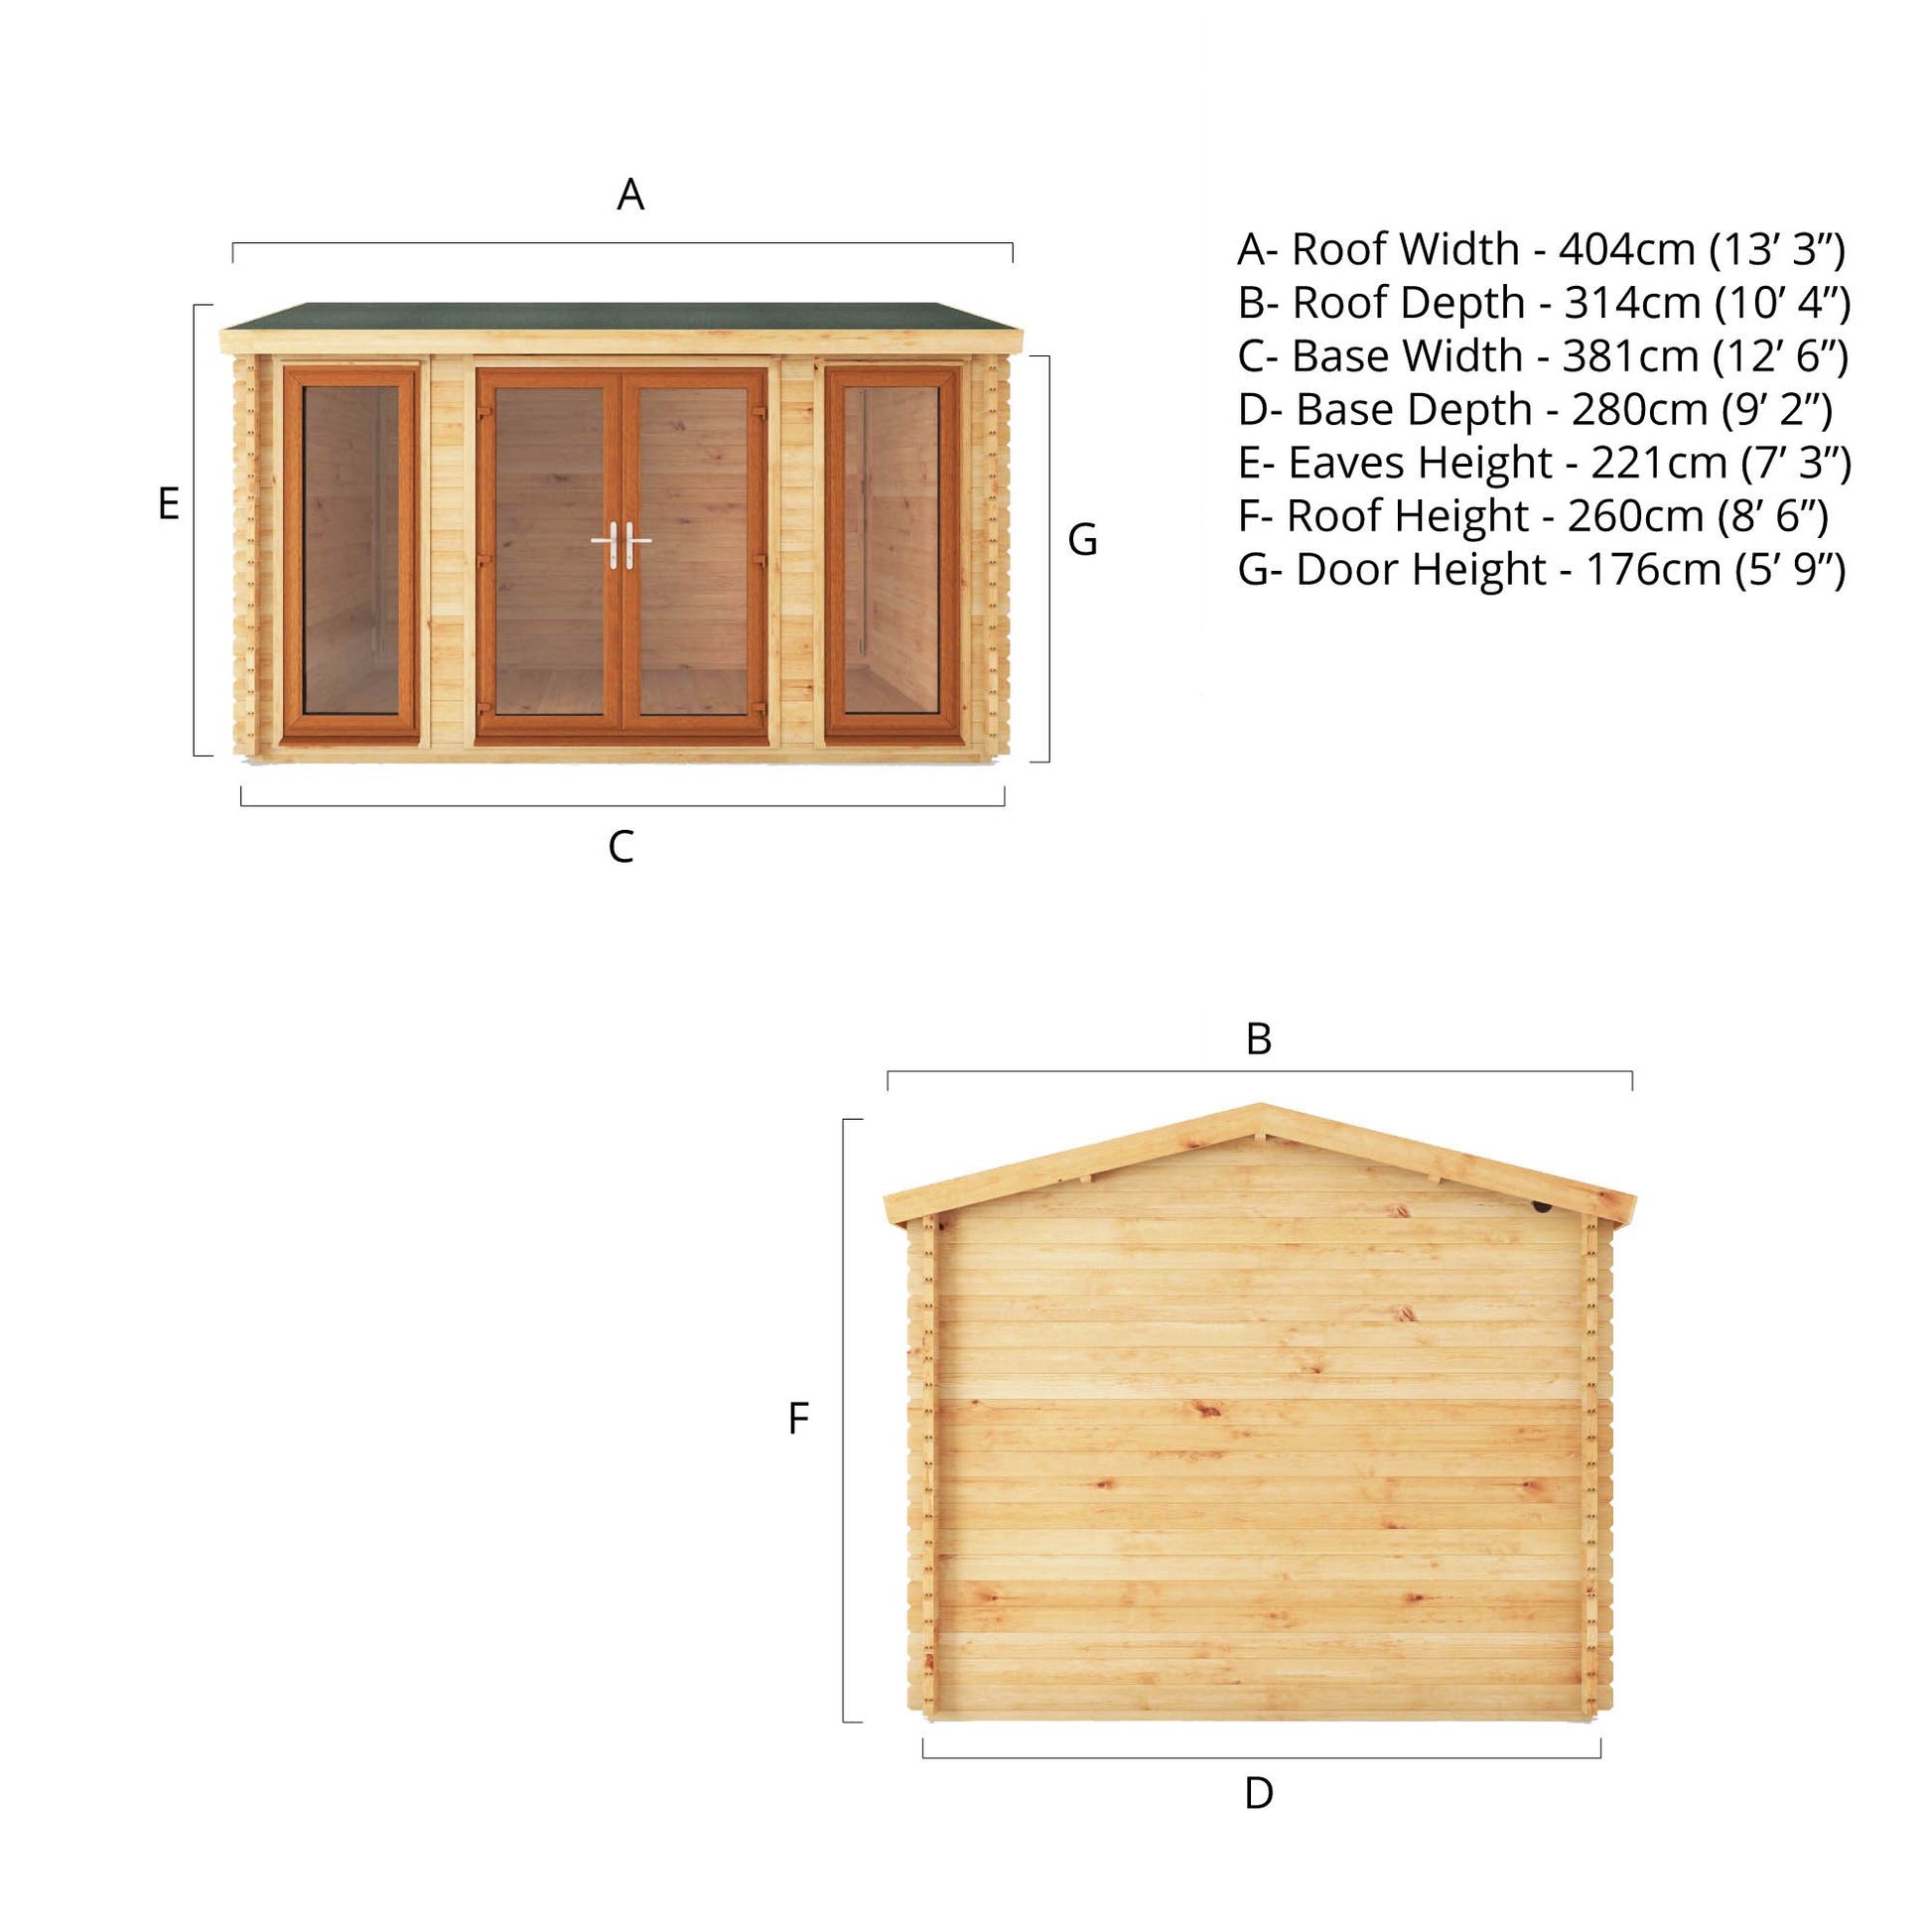 A specification drawing showing the dimensions of a log cabin